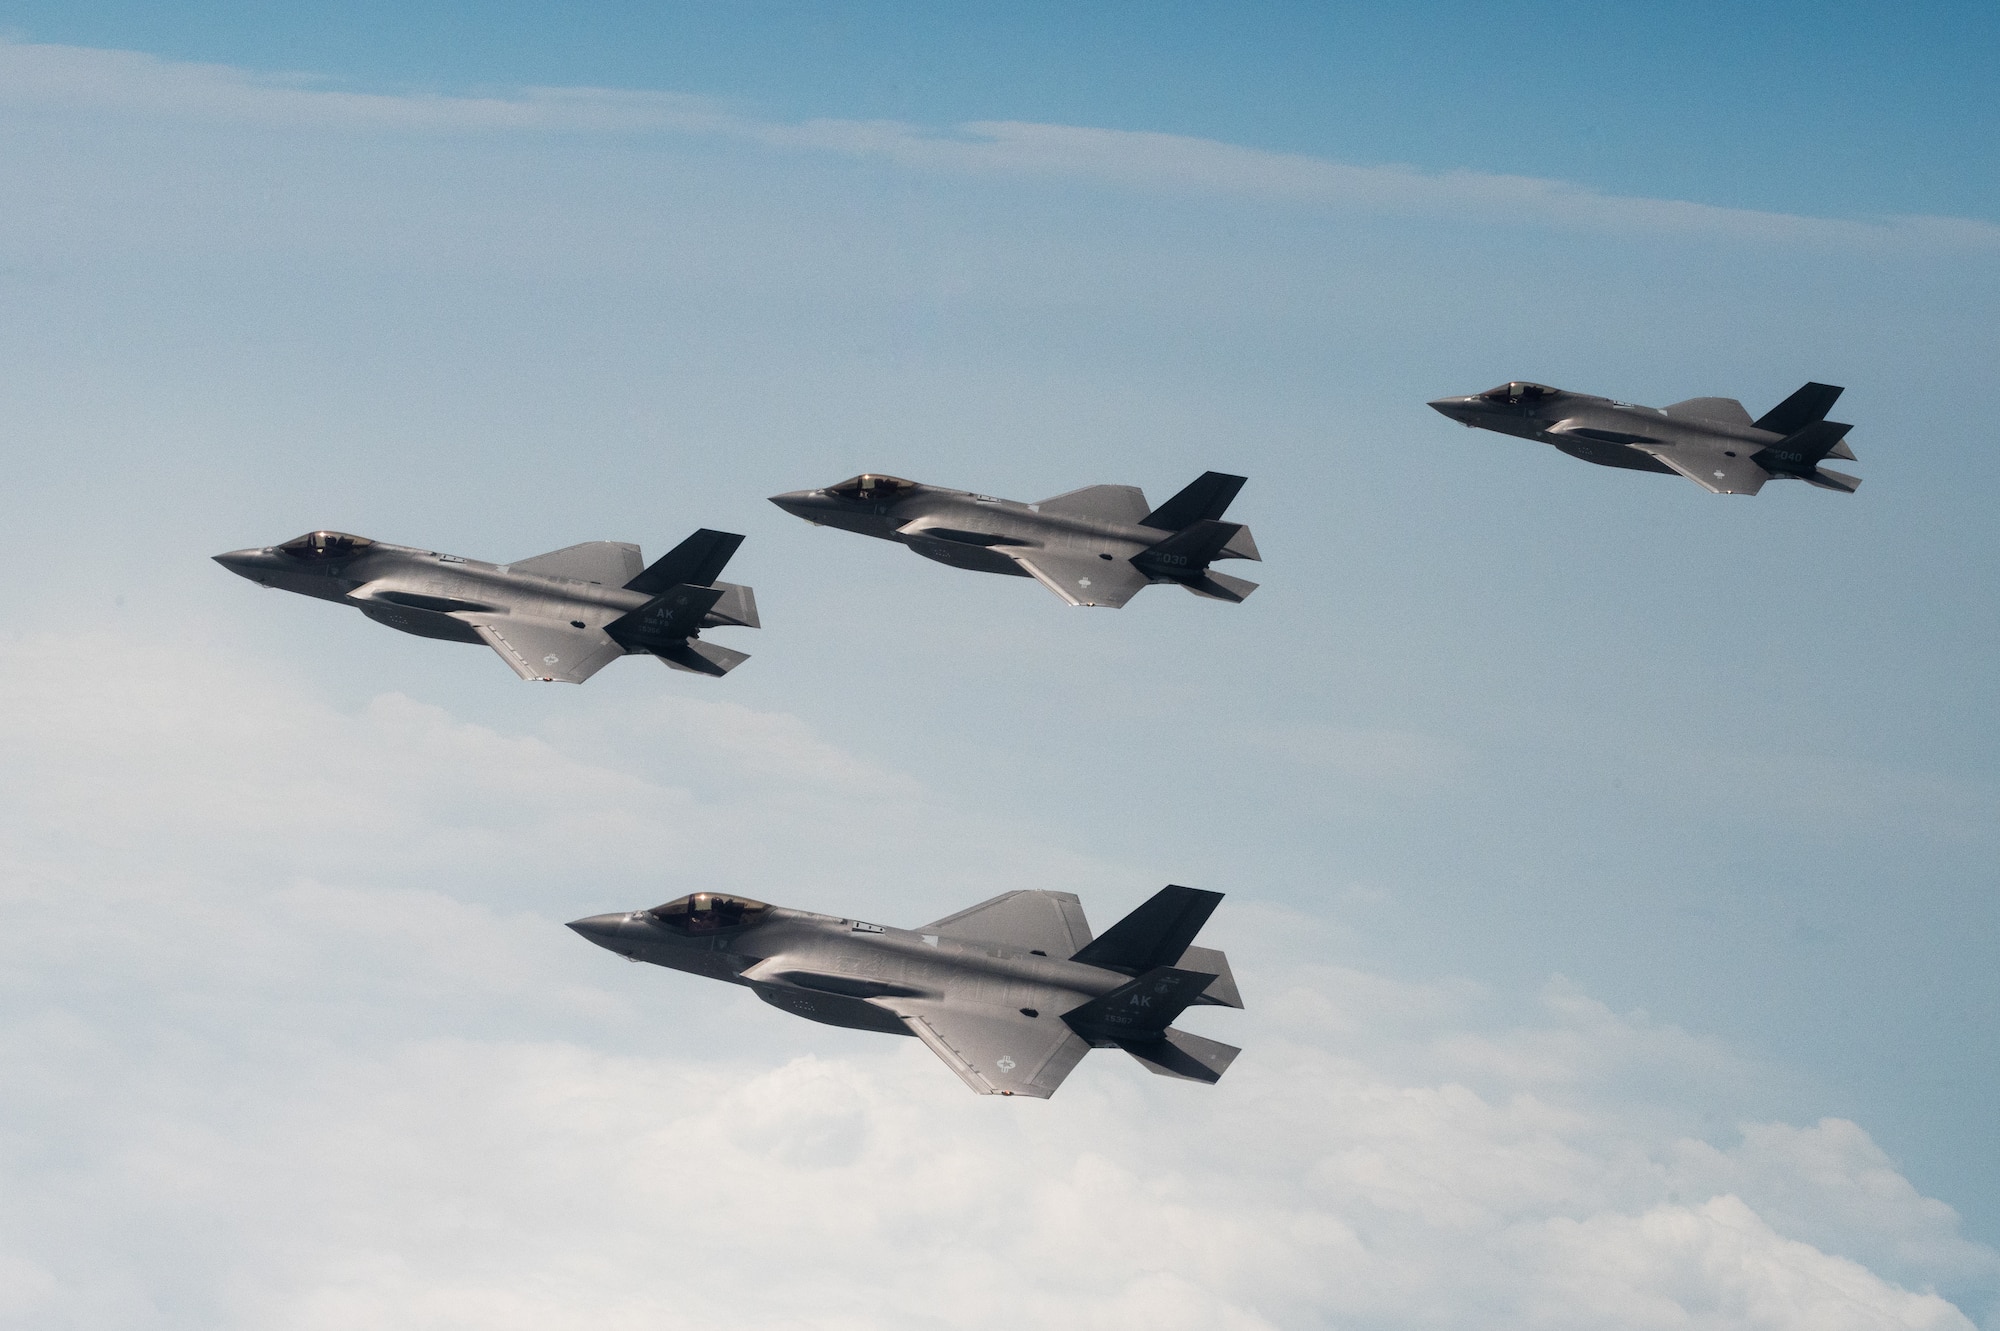 U.S. Air Force F-35 Lightning IIs from the 365th Fighter Squadron at Eielson Air Force Base fly side by side with Republic of Korea Air Force F-35s from the 151st and 152nd Combat Flight Squadrons as part of a bilateral exercise over the Yellow Sea